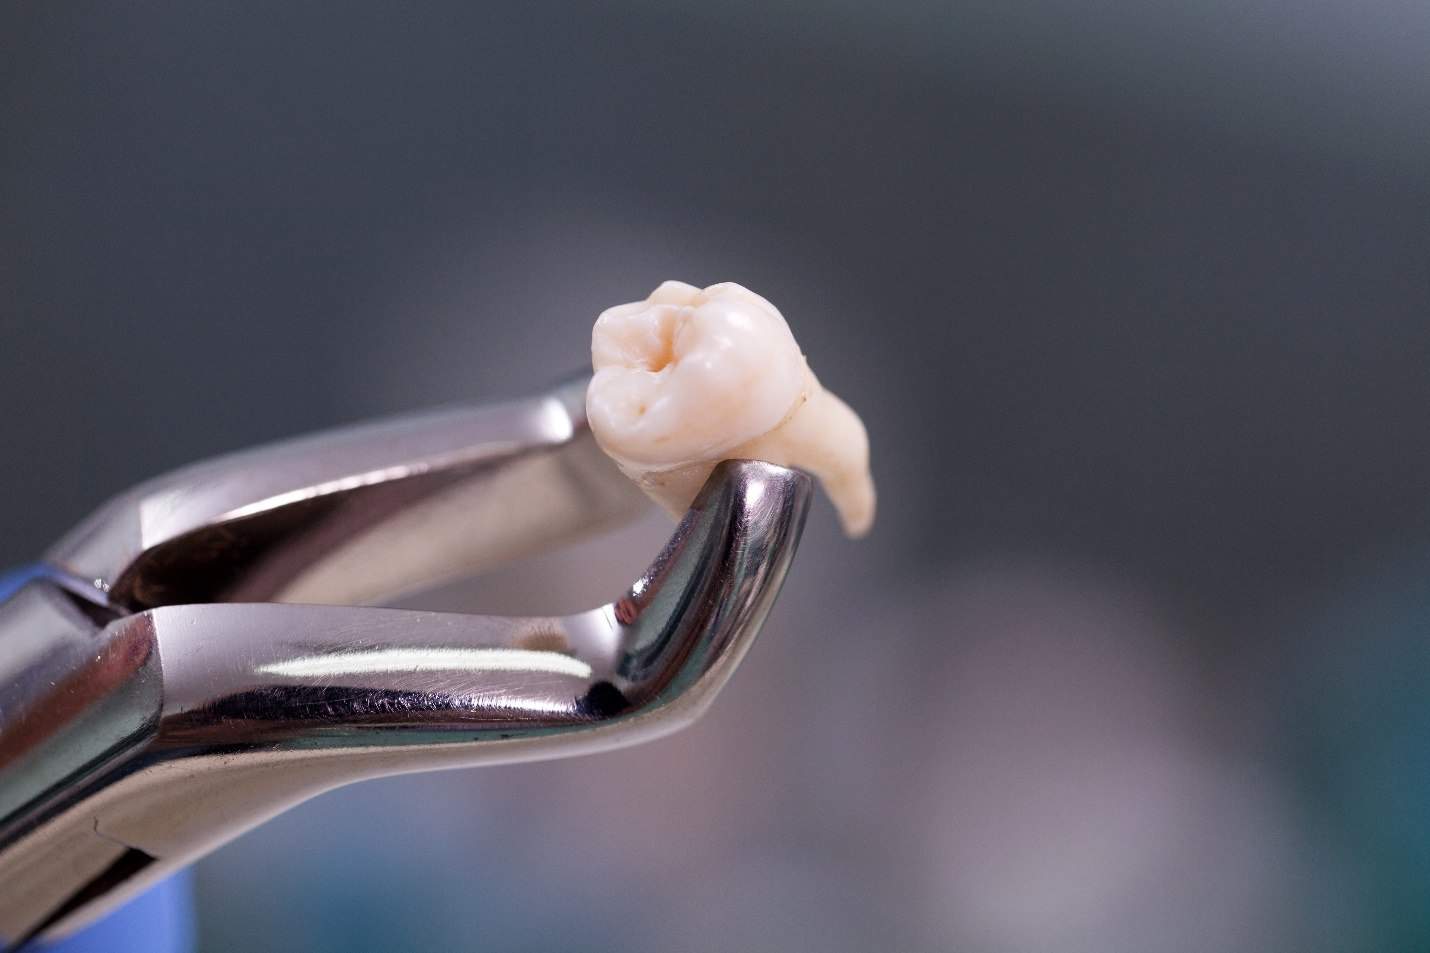 Close-up of tooth gripped in forceps following extraction